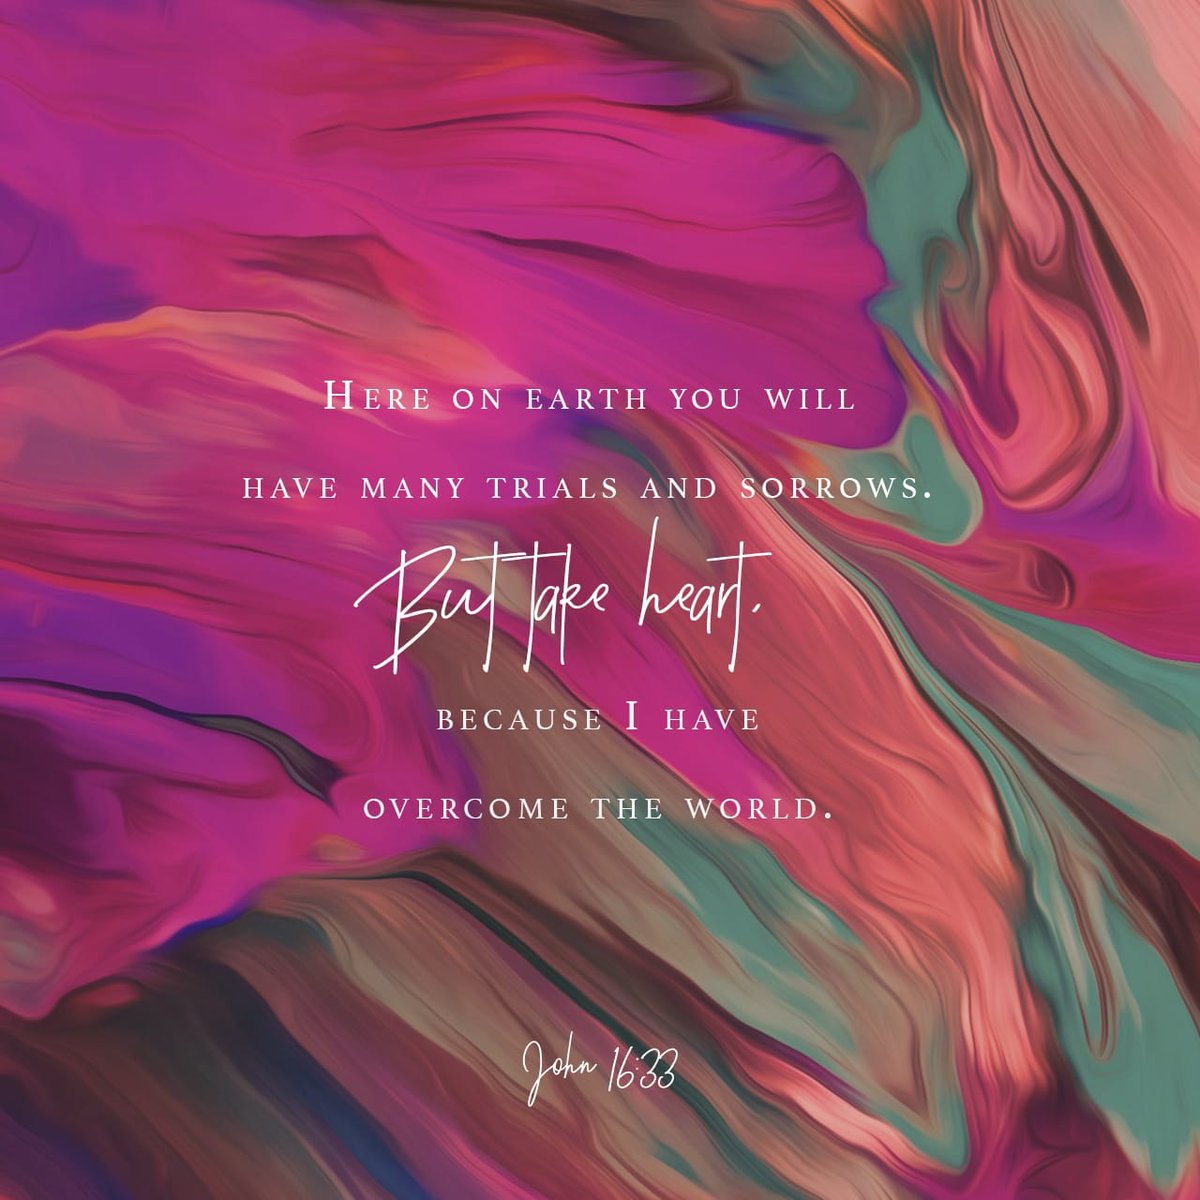 “I have told you these things, so that in me you may have peace. In this world you will have trouble. But take heart! I have overcome the world.” -John 16:33 NIV #VerseoftheDay #tuesdaythoughts #tuesdayvibe #tuesdaymotivation